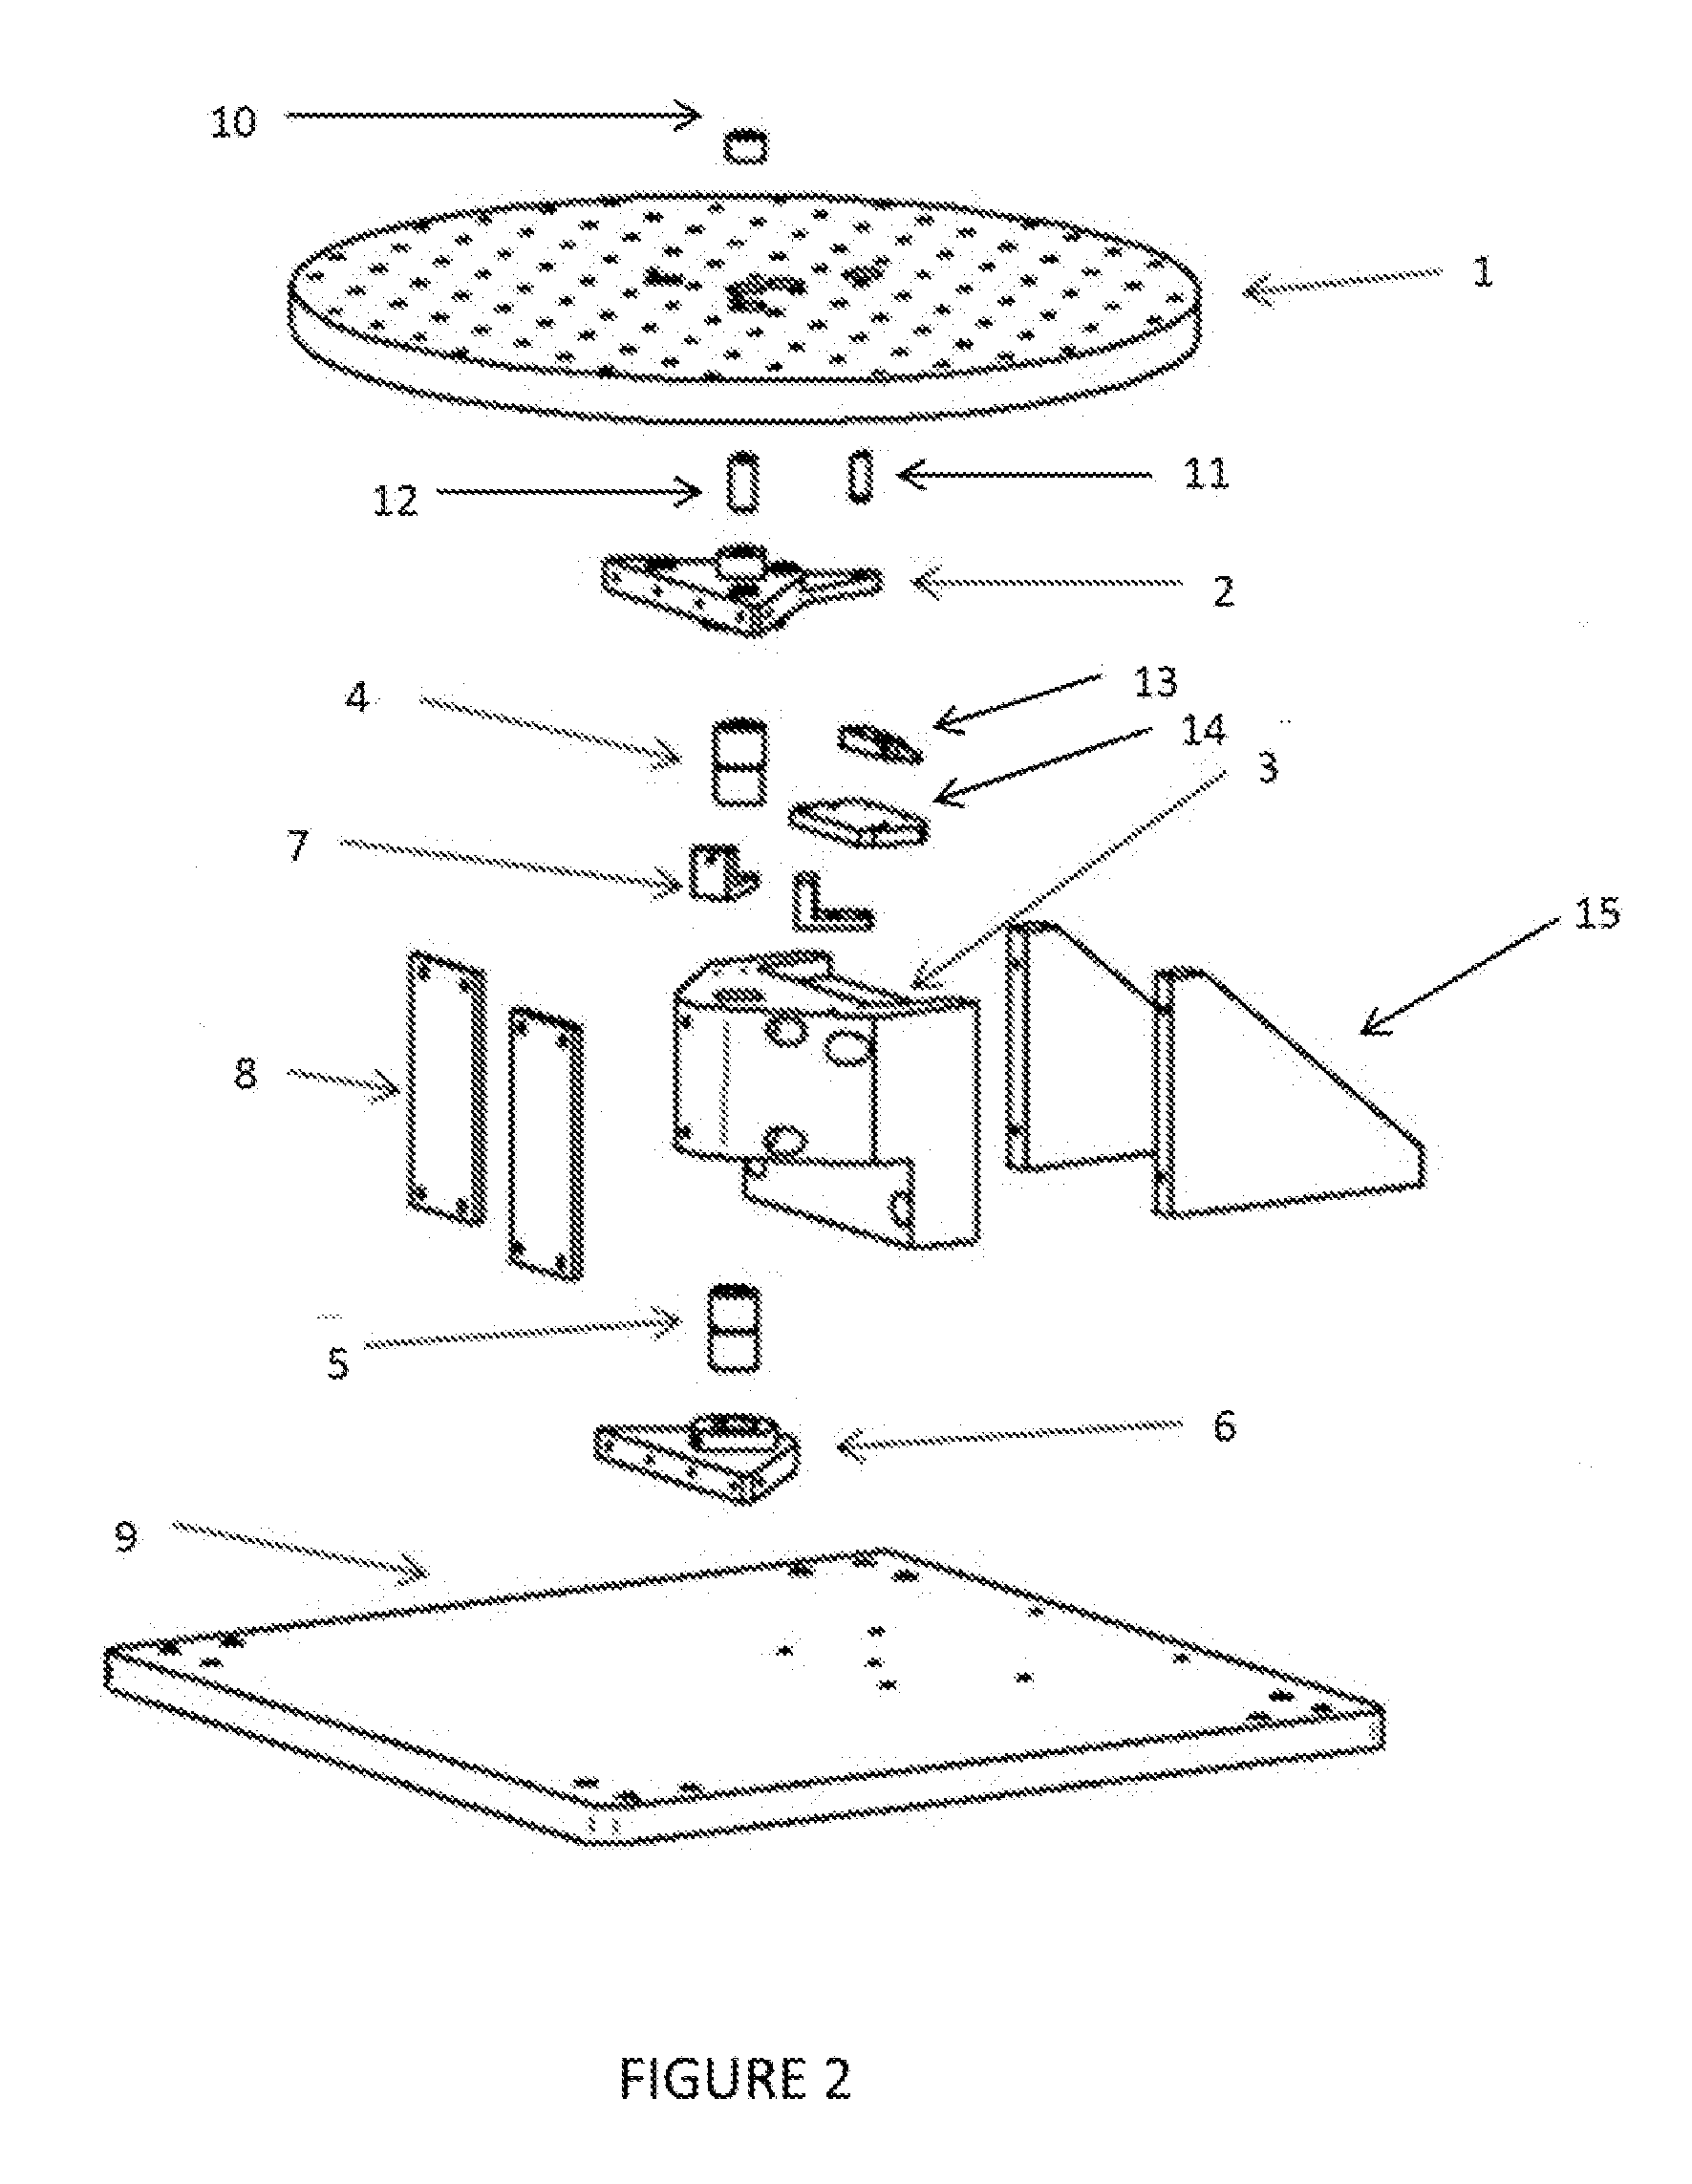 Apparatus and method for measuring moment of inertia